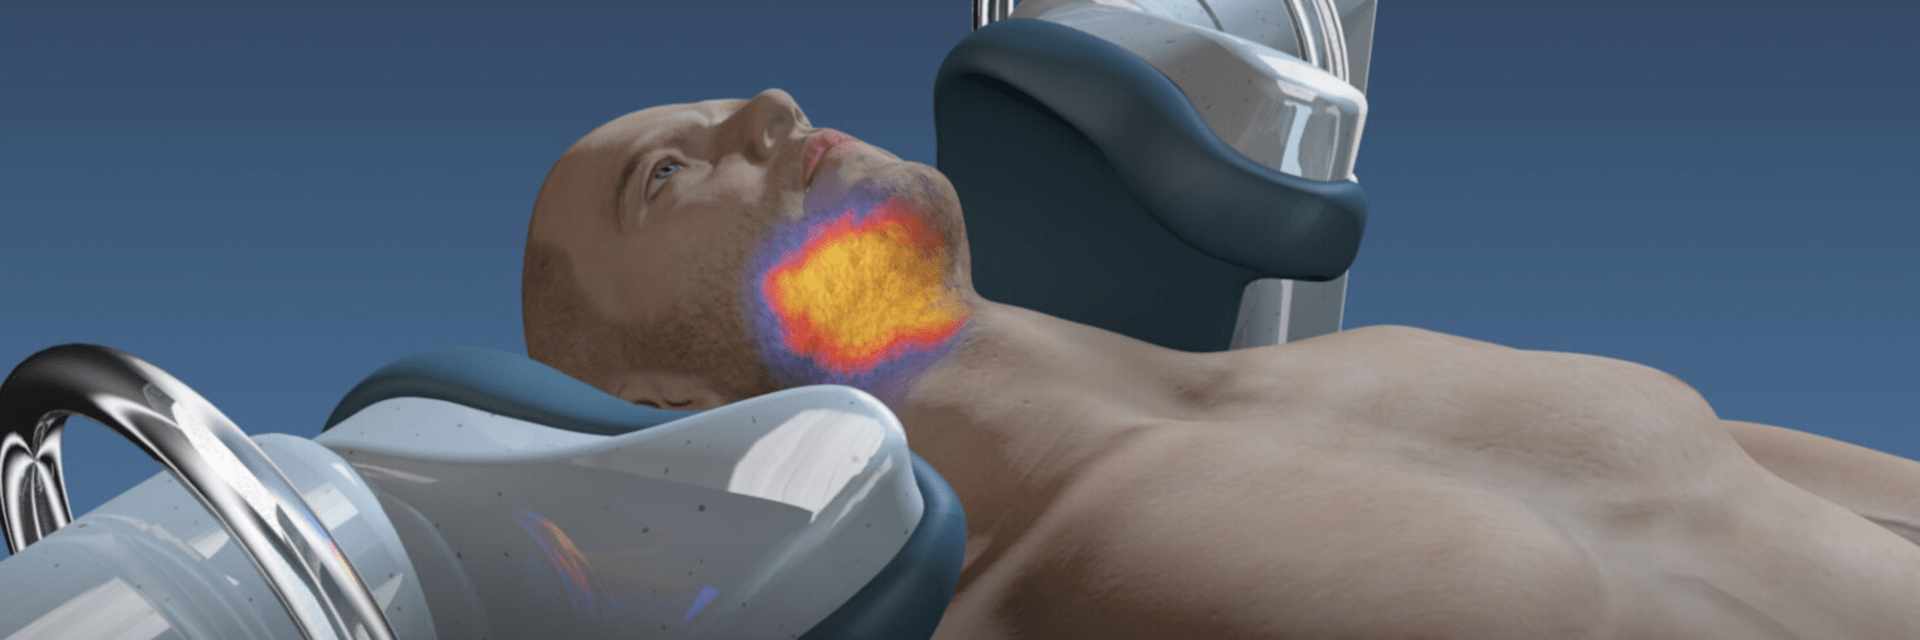 Sensius can further develop unique thermotherapy thanks to European Union grant